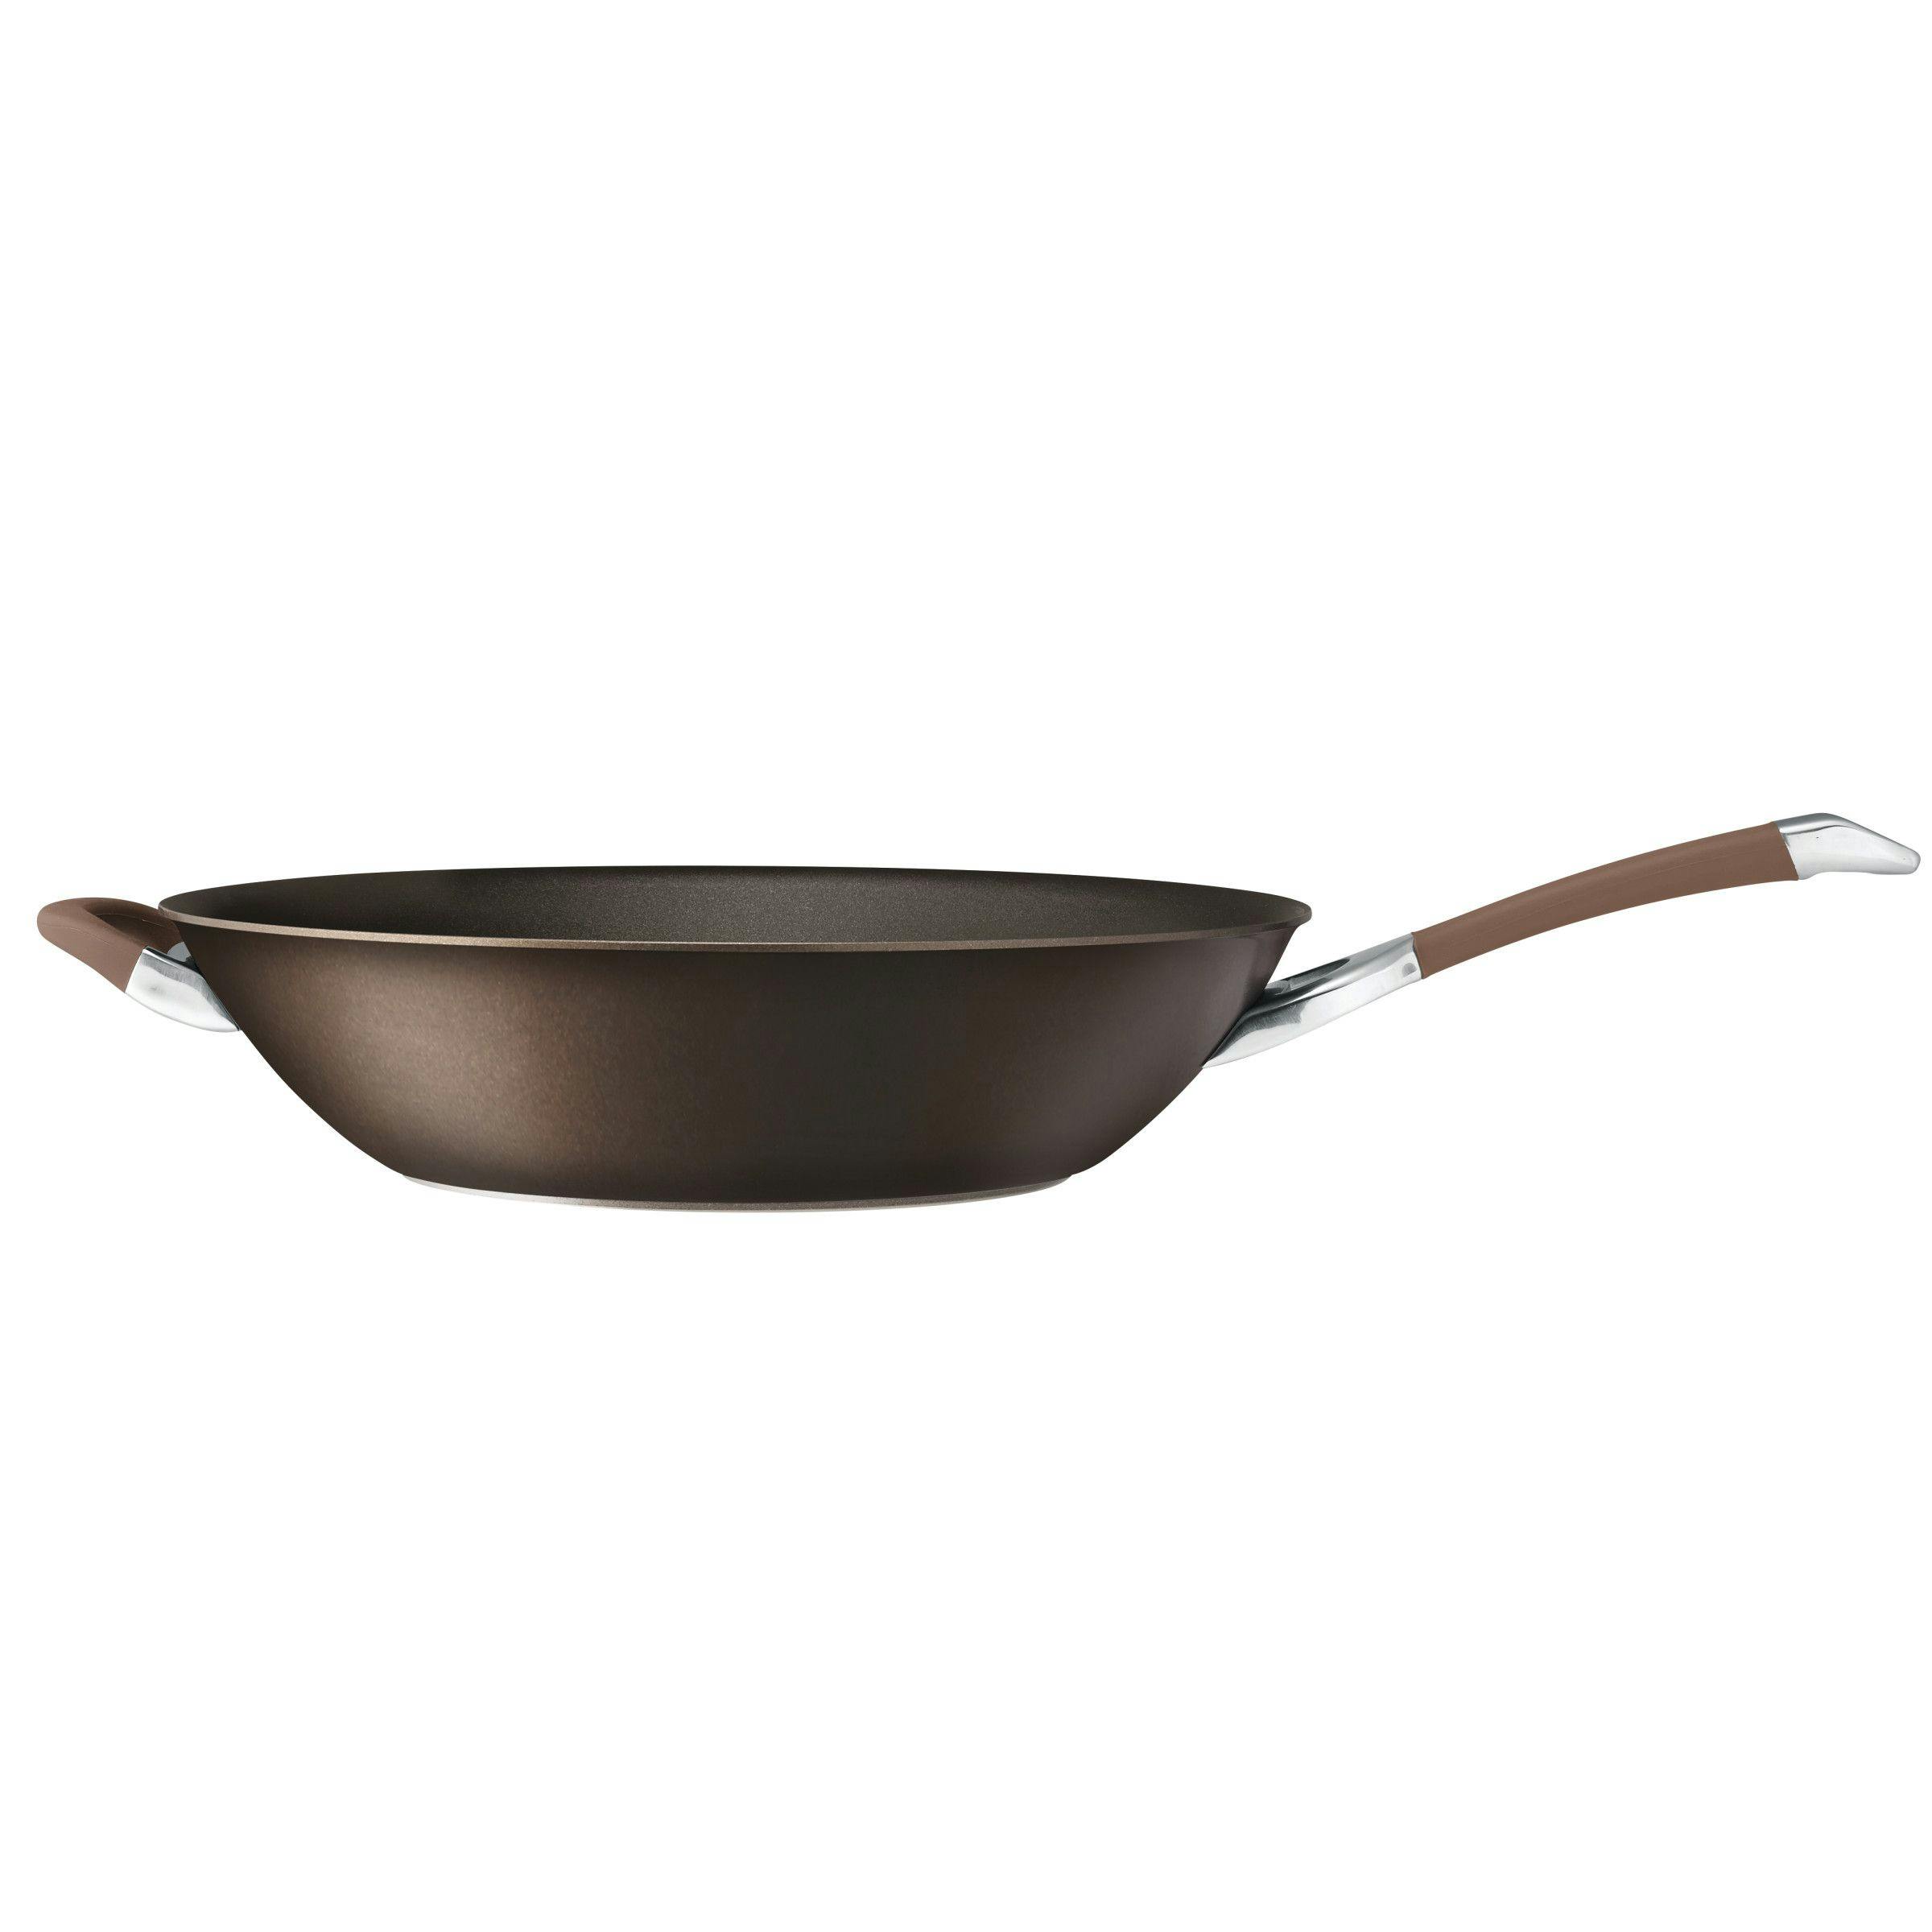 Circulon Symmetry Hard-Anodized Nonstick Induction Stir Fry Pan with Helper Handle, 14-Inch, Chocolate